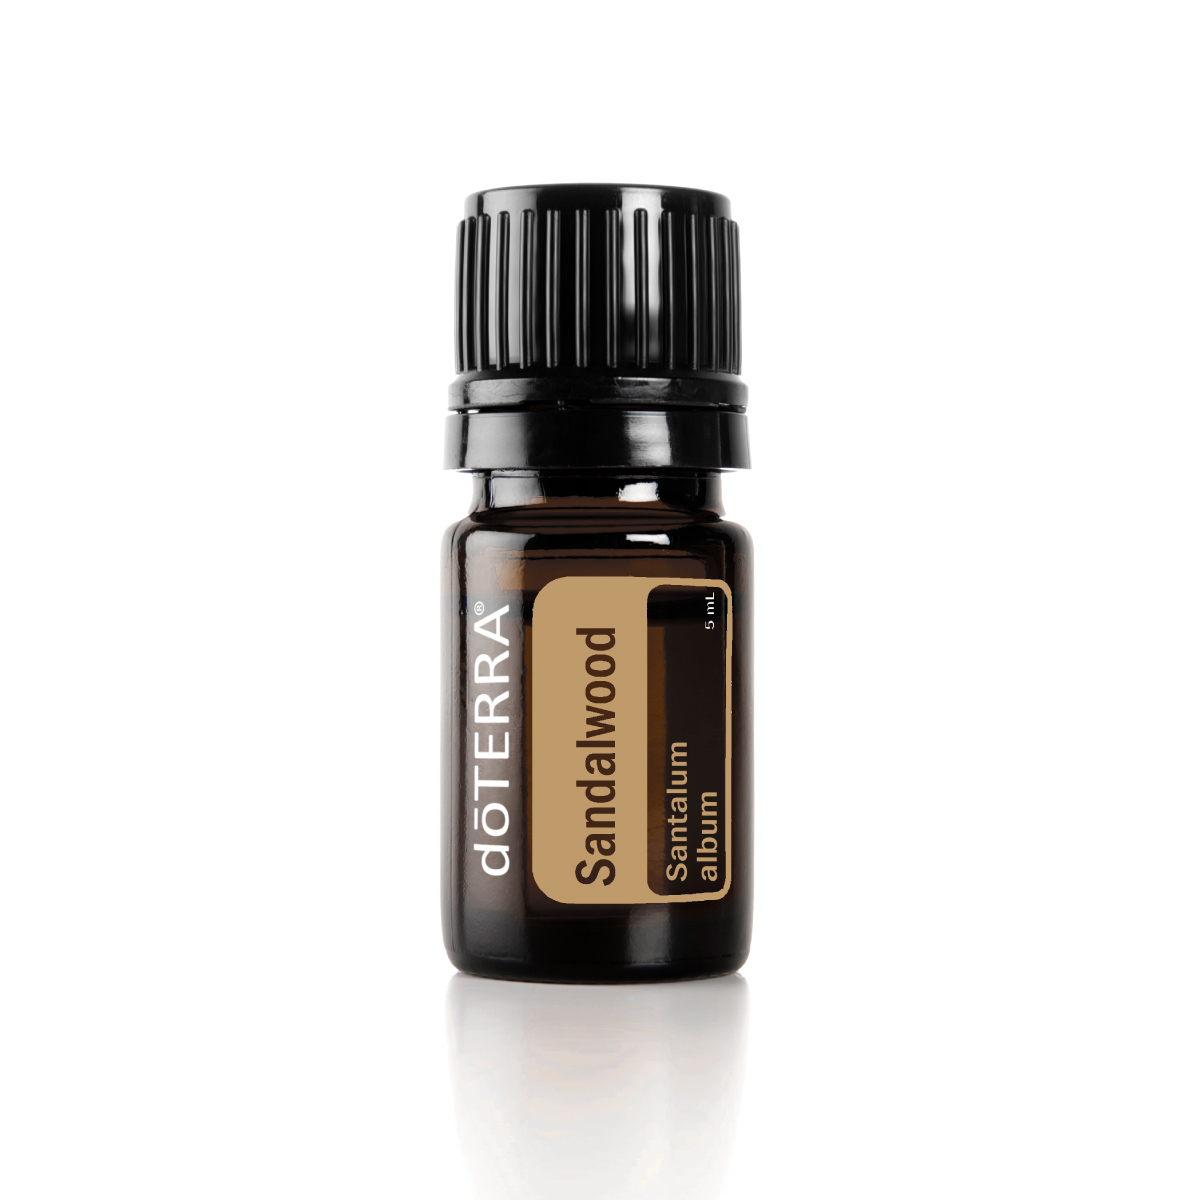 Bottle of doTERRA Sandalwood oil. What is Sandalwood oil good for? Sandalwood essential oil can be used to soothe the skin and create a grounding atmosphere during meditation.